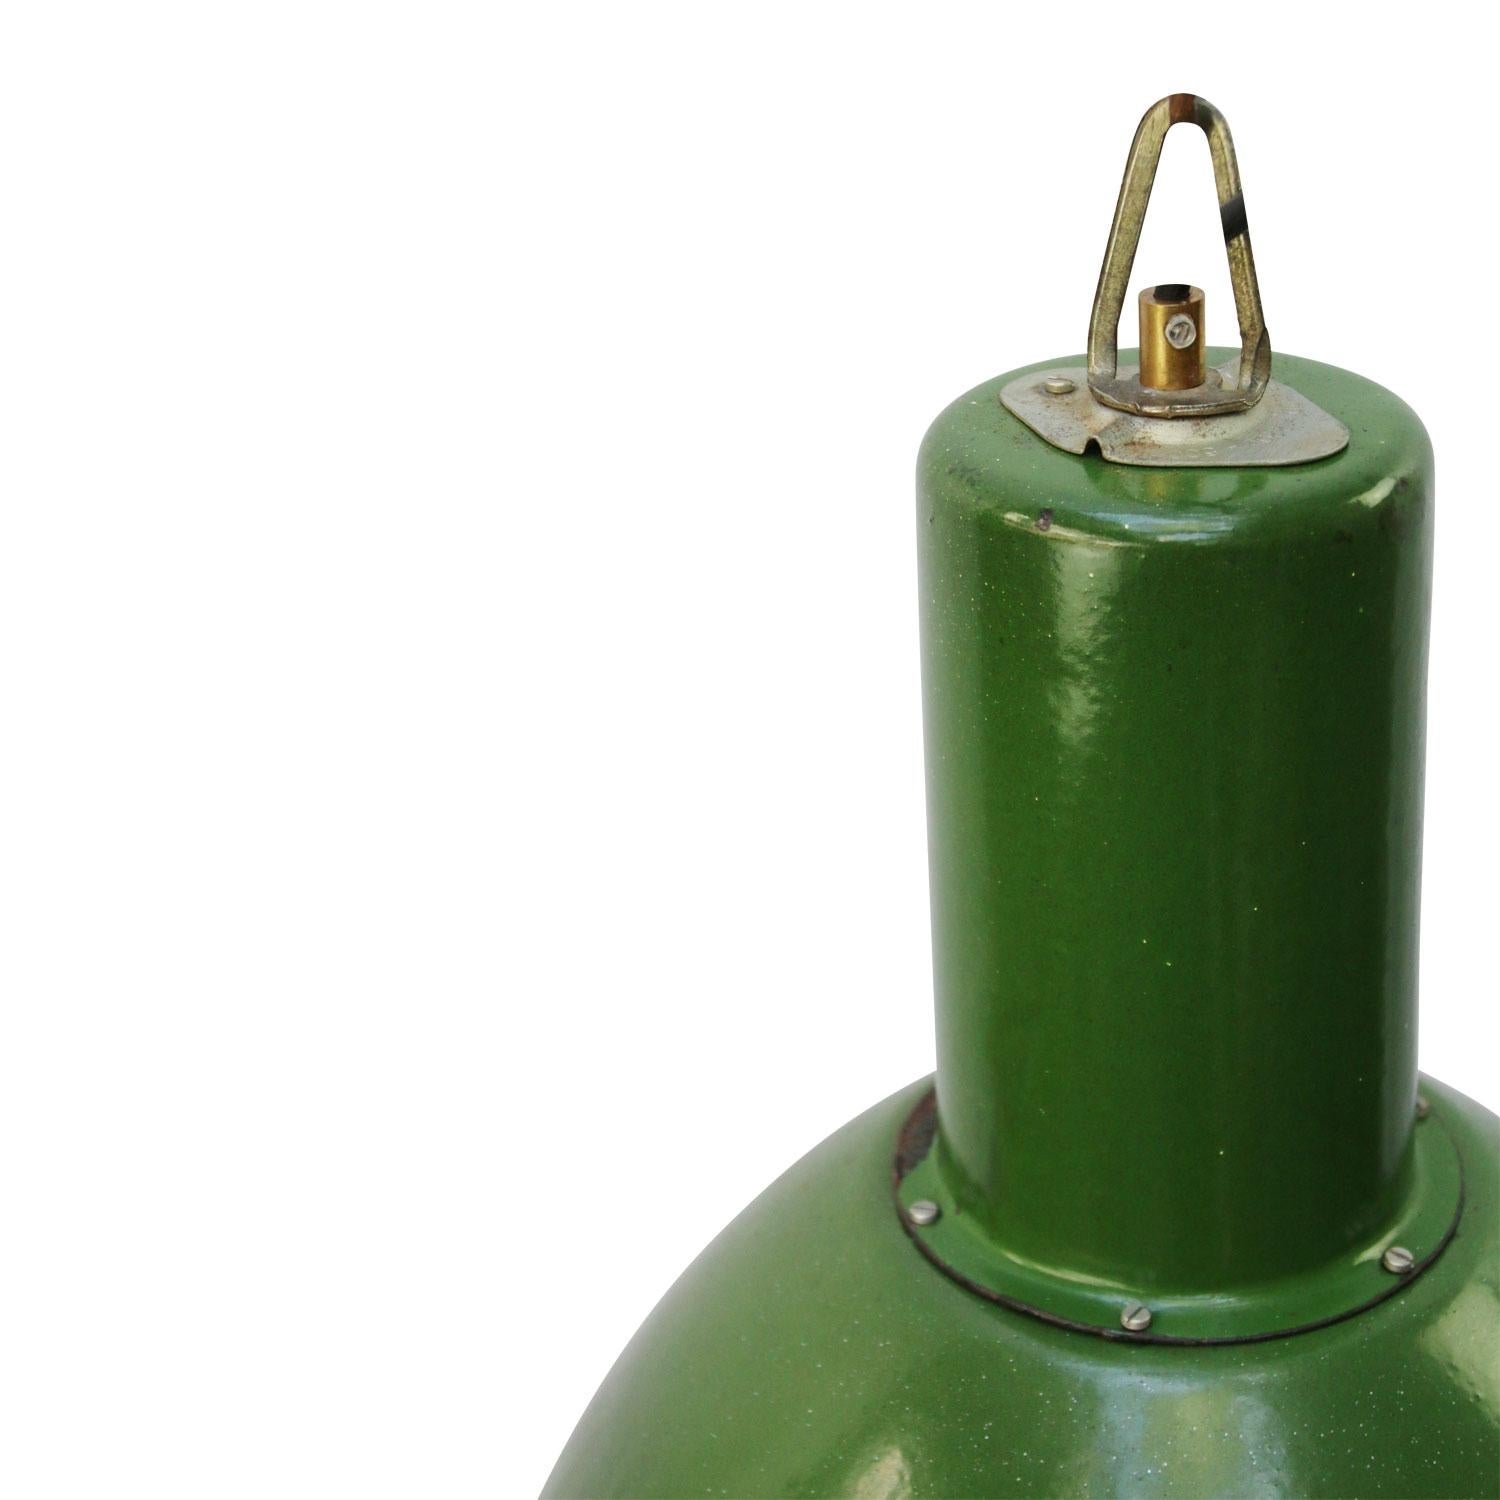 Enamel industrial pendant
green enamel shade, white inside.
Green enamel top.

Weight: 3.40 kg / 7.5 lb

Priced per individual item. All lamps have been made suitable by international standards for incandescent light bulbs, energy-efficient